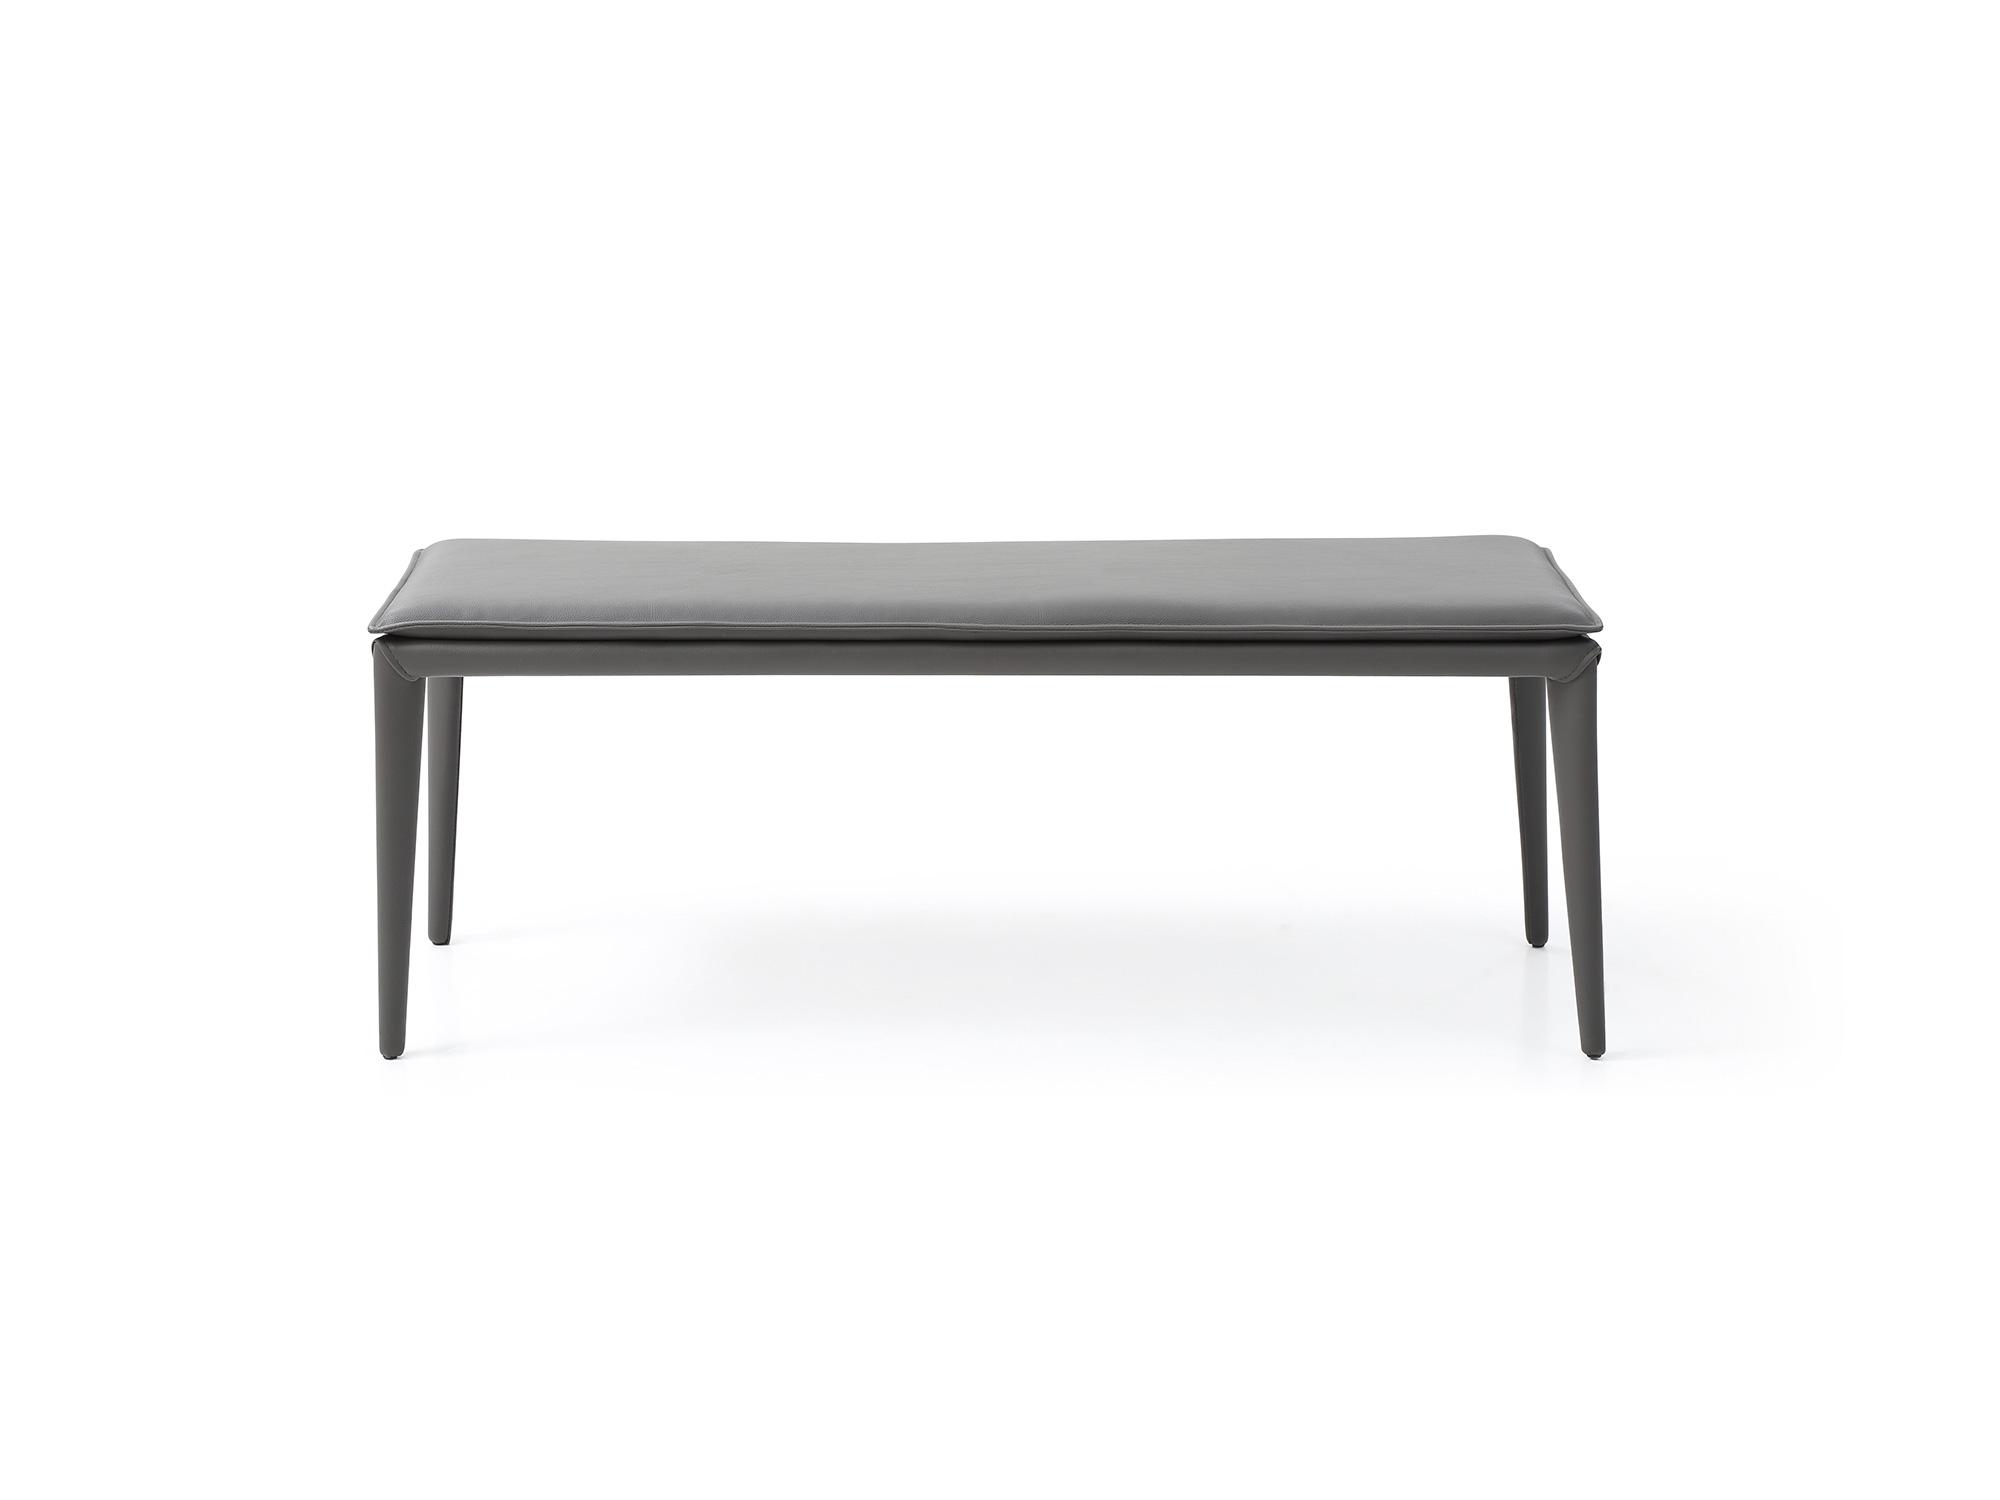 Transitional Bench BN1476-DGRY Jared BN1476-DGRY in Dark Gray Faux Leather